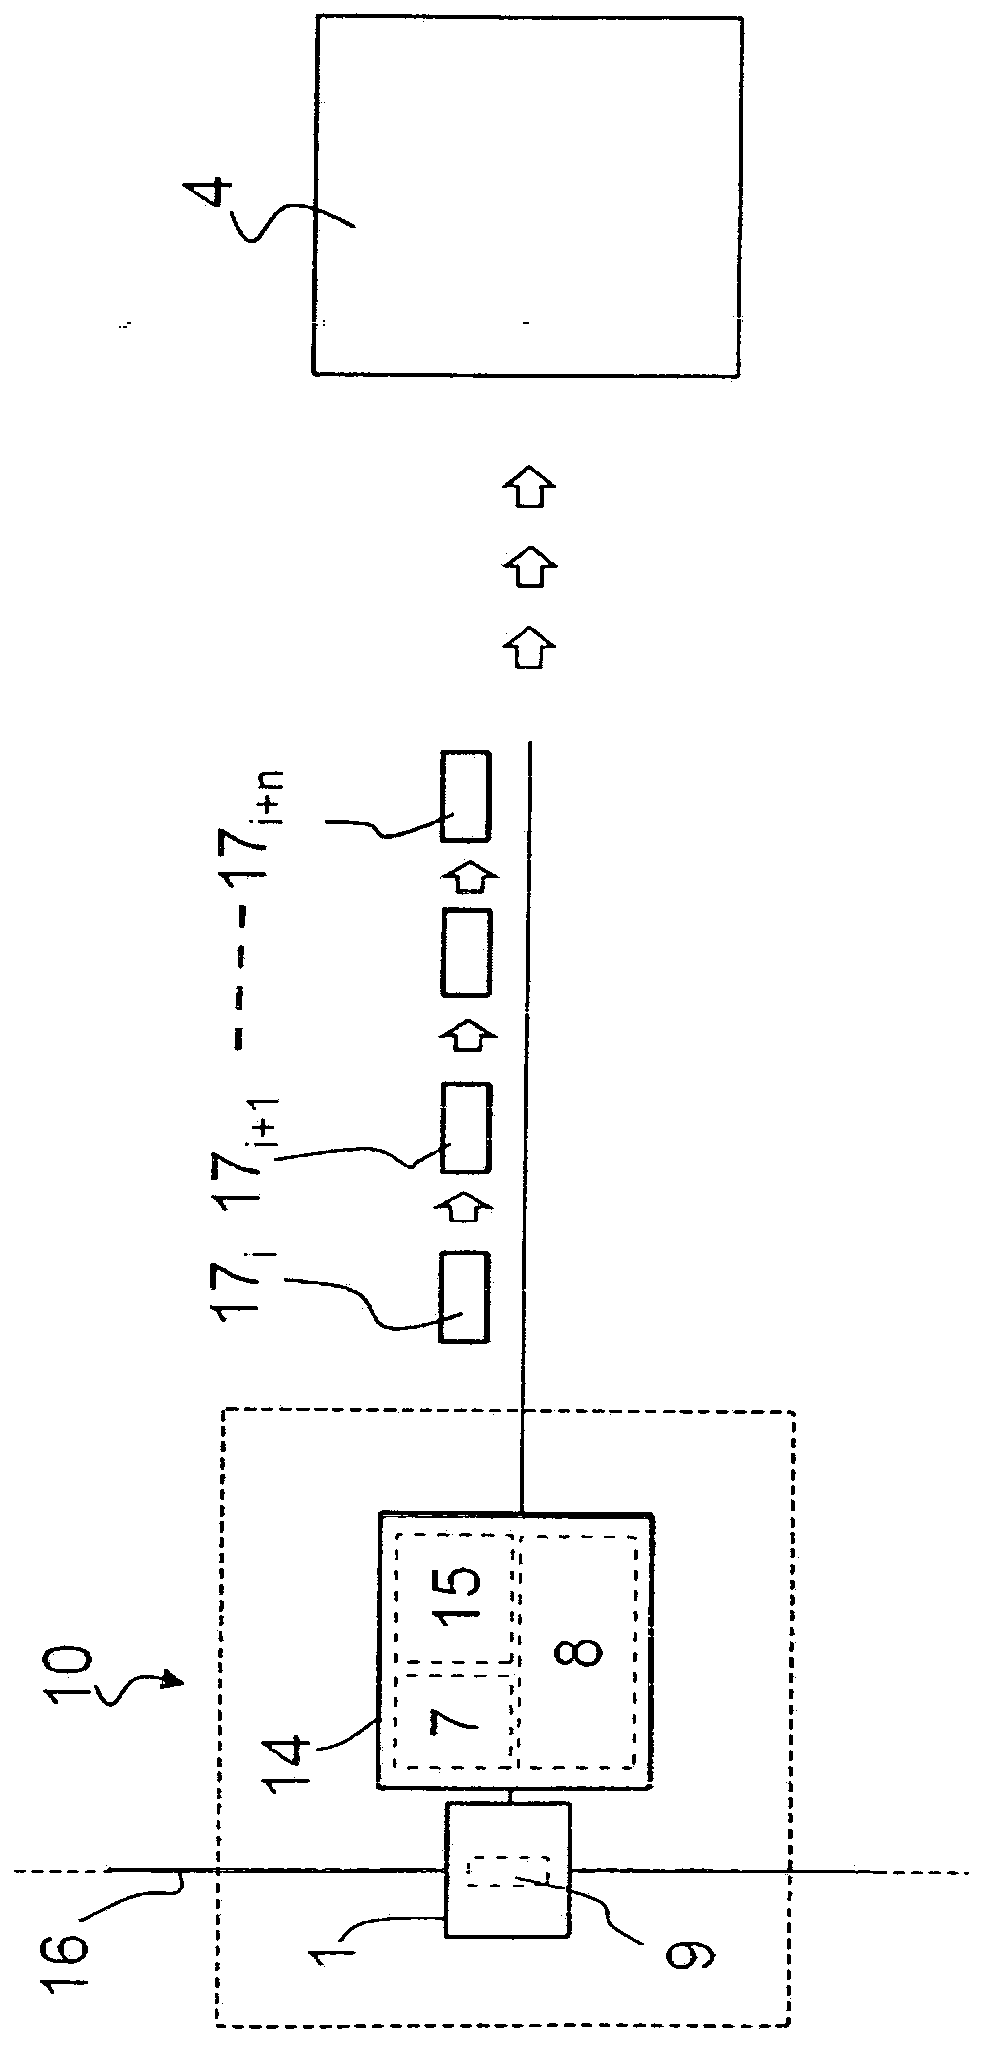 Method for collecting data, sensor and supply network